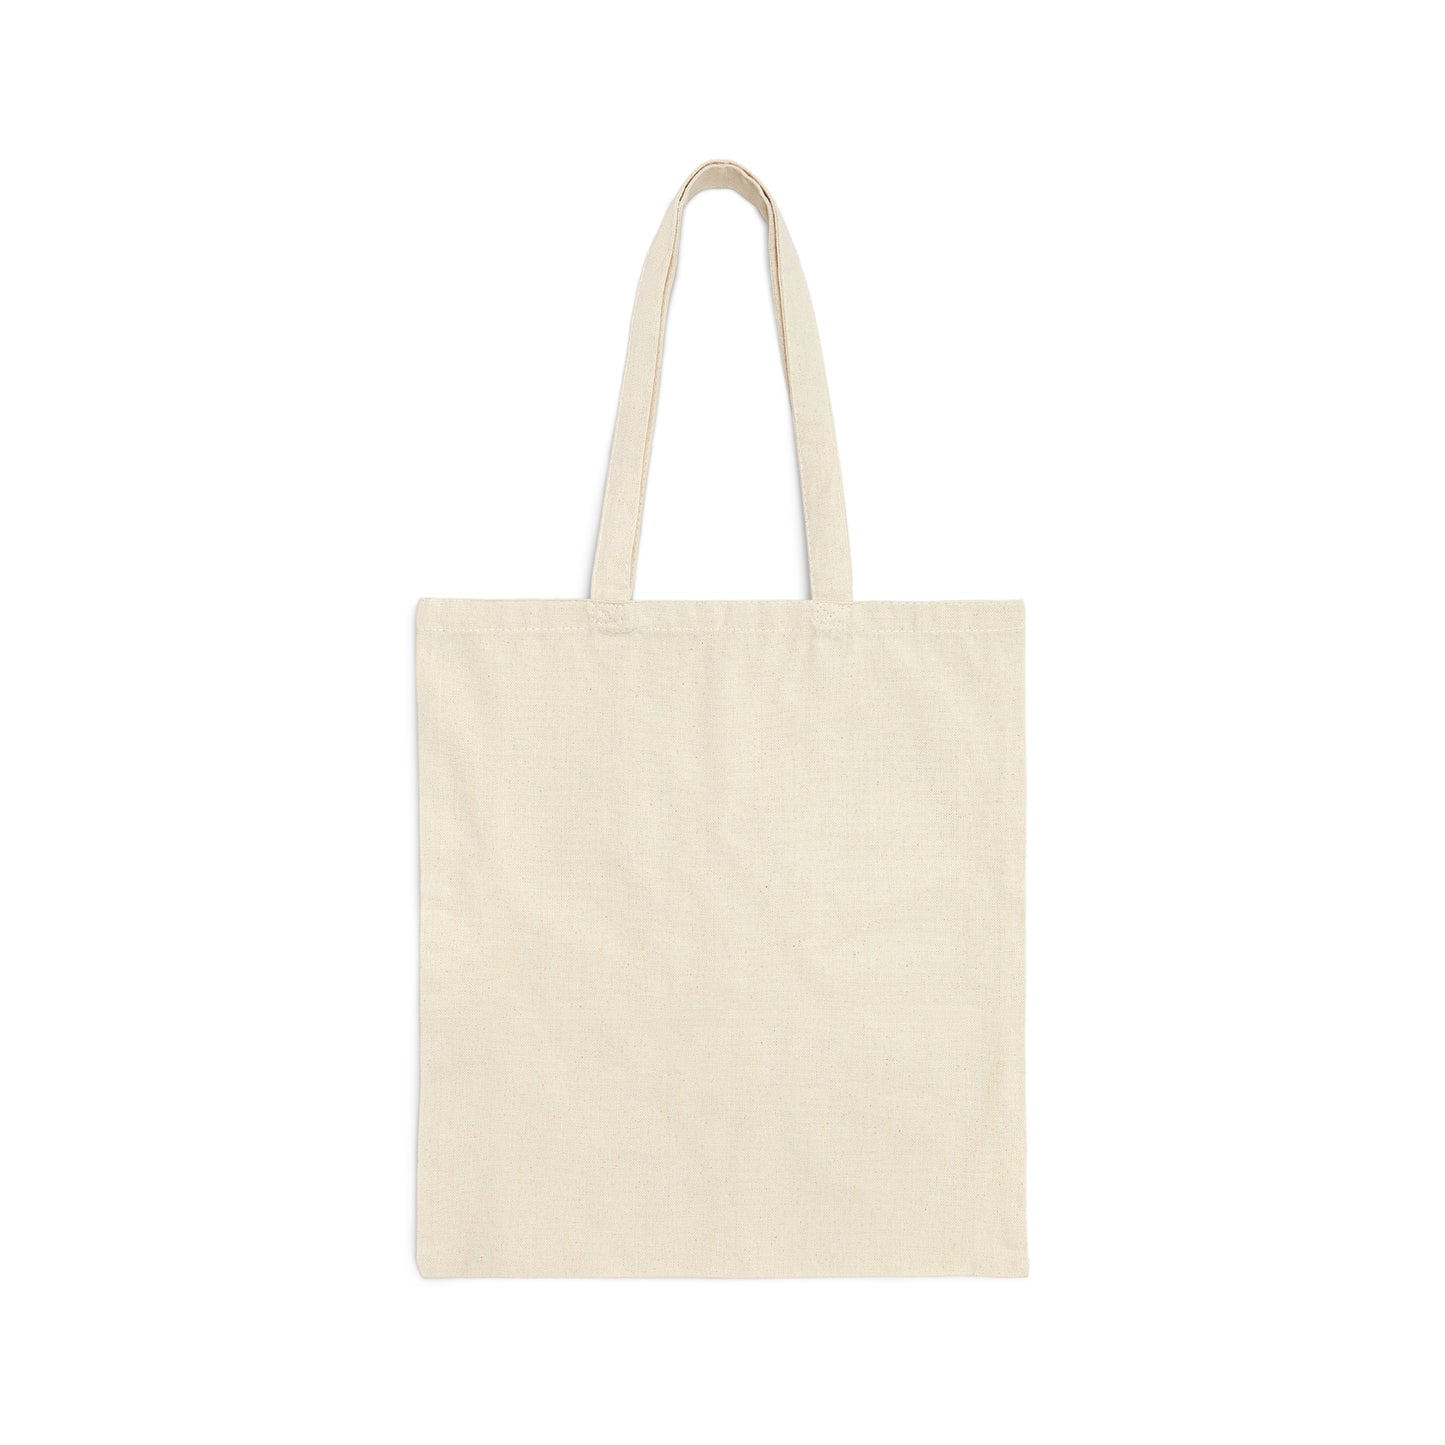 I'm in a Plant Cult Cotton Canvas Tote Bag